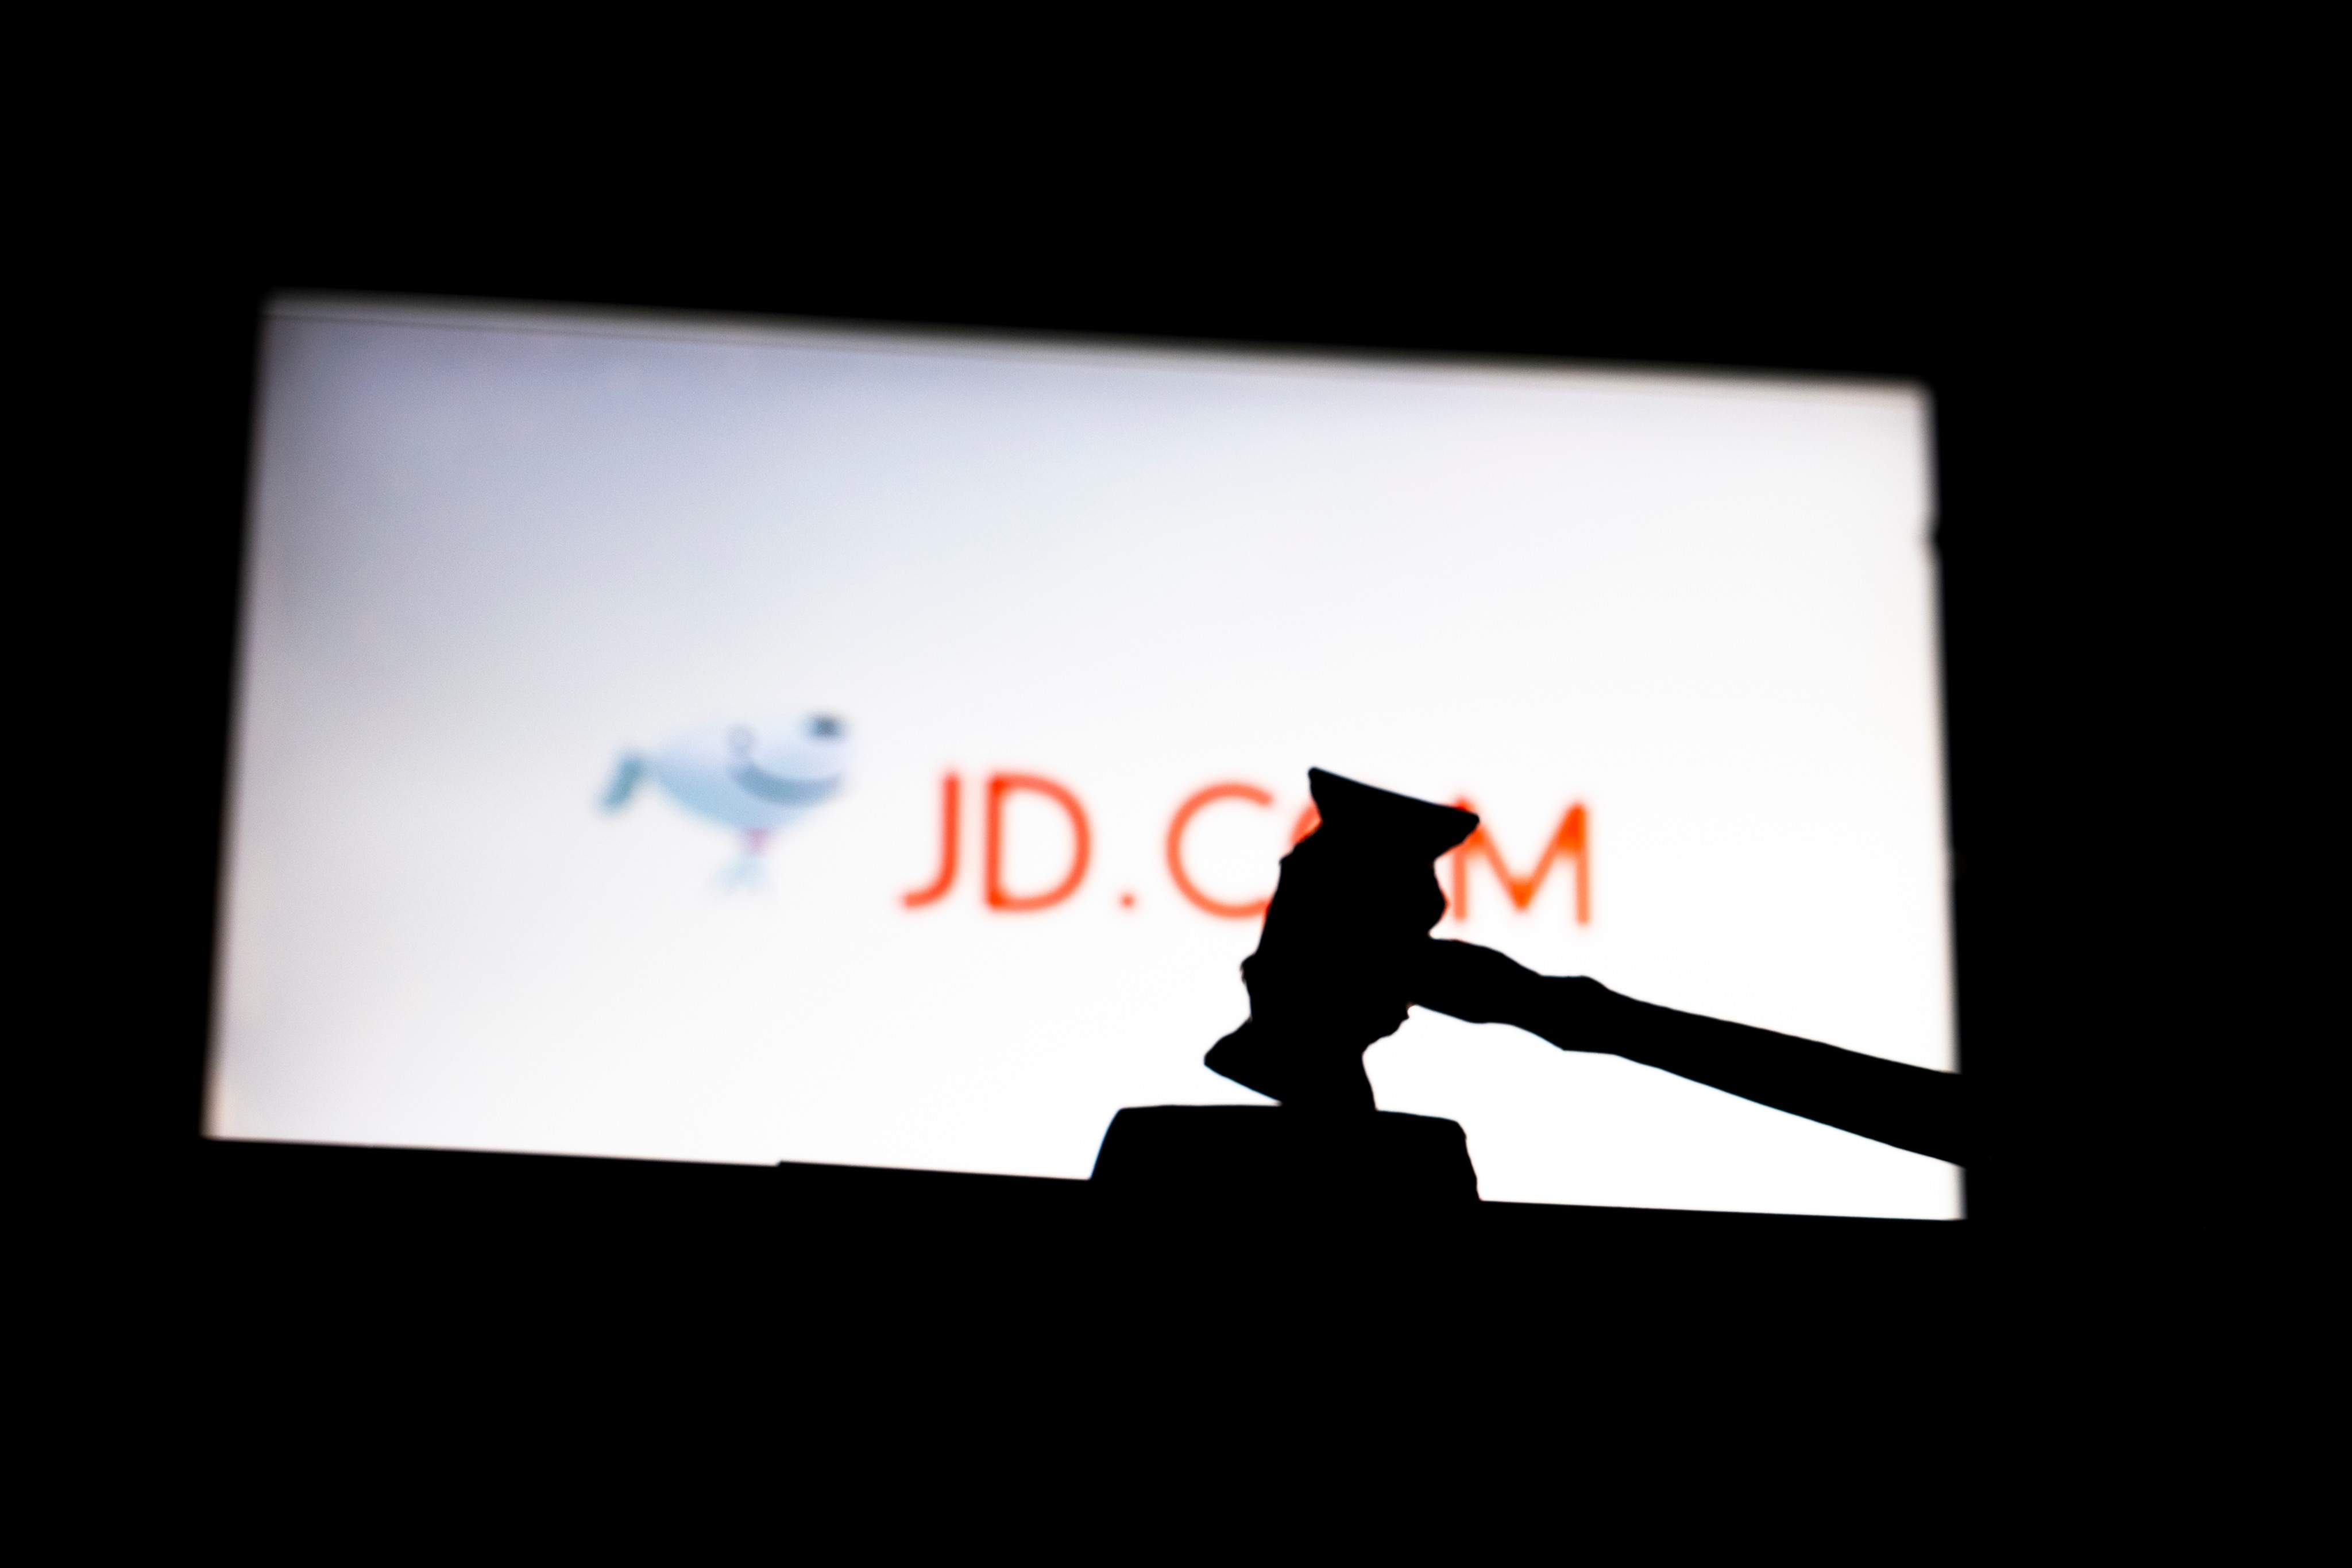 The Beijing High People’s Court has ruled in favour of JD.com in the e-commerce firm’s antitrust lawsuit against rival Alibaba Group Holding. Photo: Shutterstock